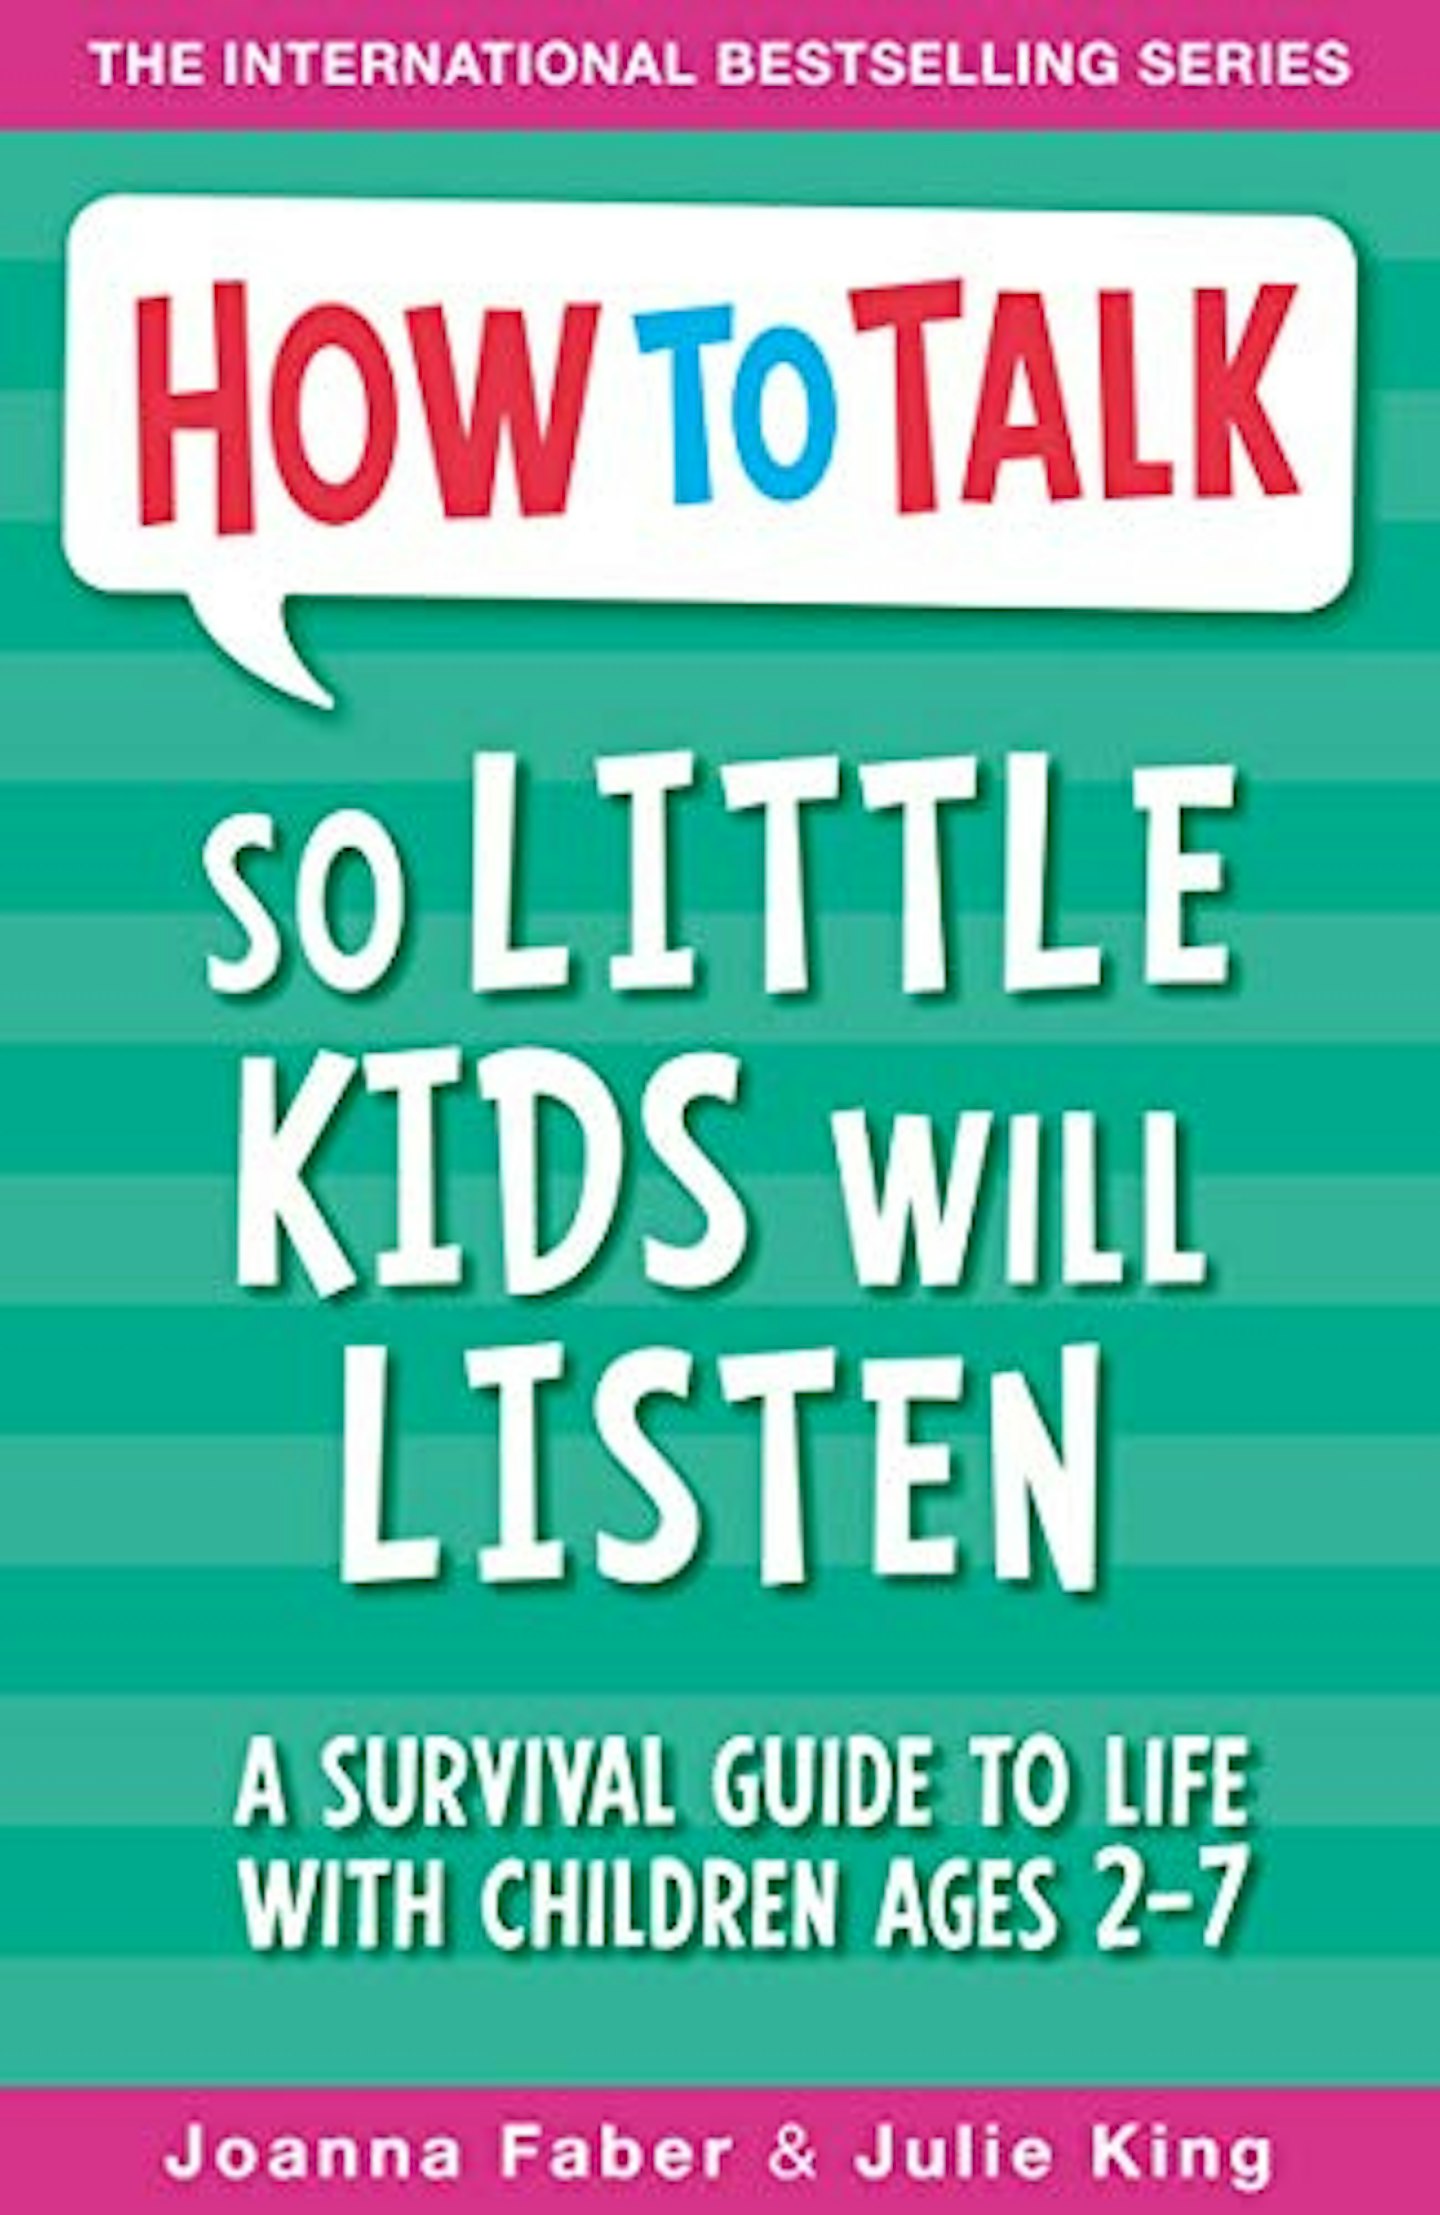 How To Talk So Little Kids Will Listen: A Survival Guide to Life with Children Ages